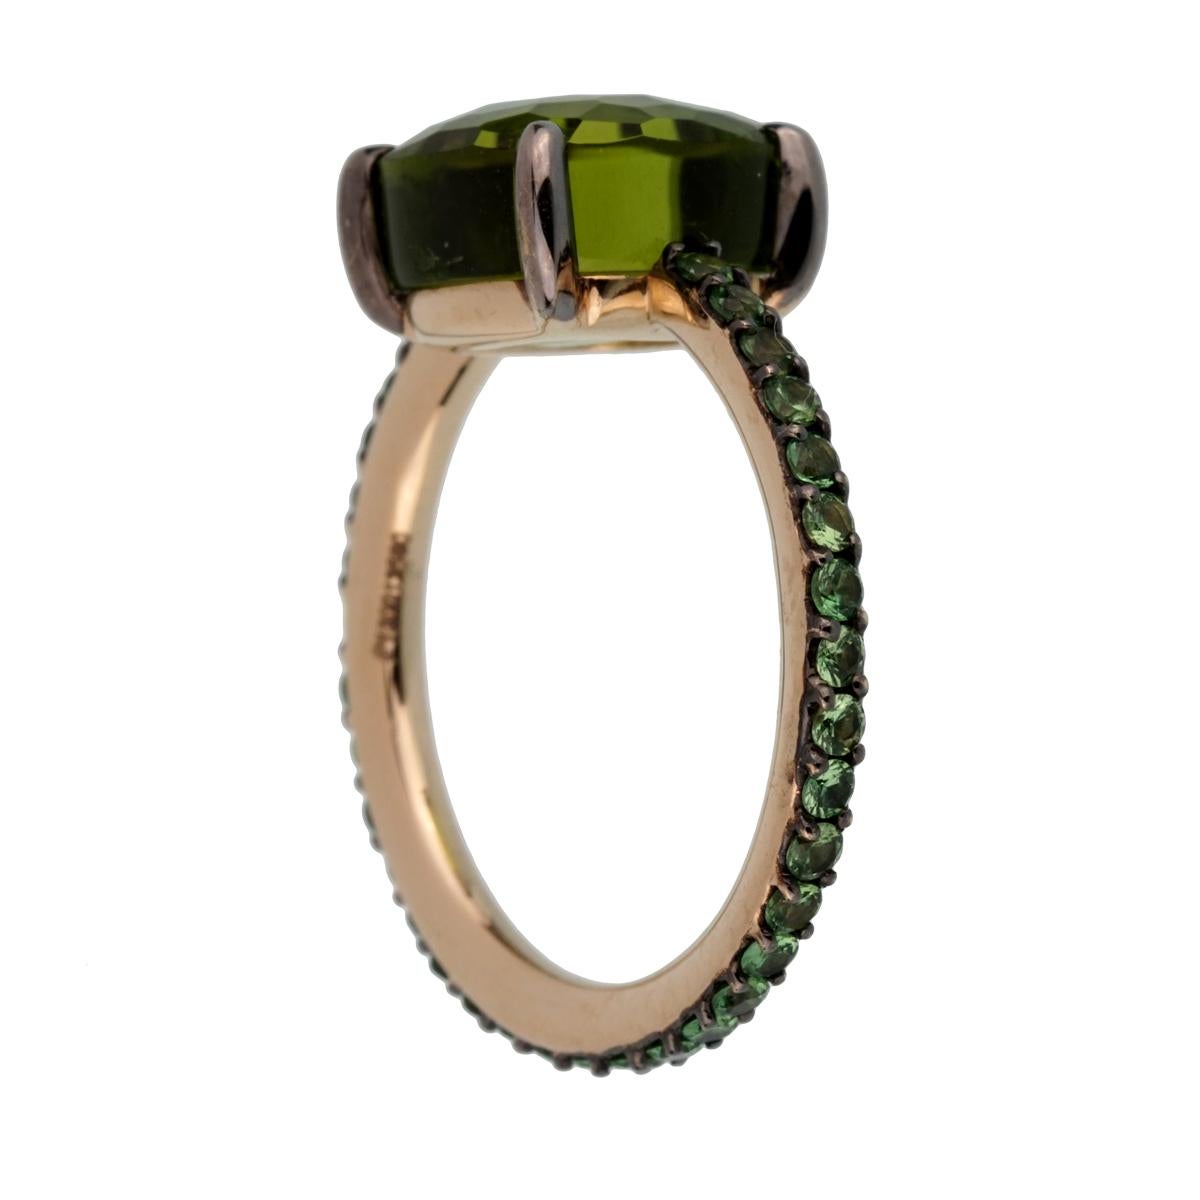 A fabulous brand new Pomellato cocktail ring showcasing a 3.56ct Peridot surrounded by .61ct of brilliant round tsavorite garnets set in 18k white gold.

Pomellato Retail Price: $10,500
Sku:2444
